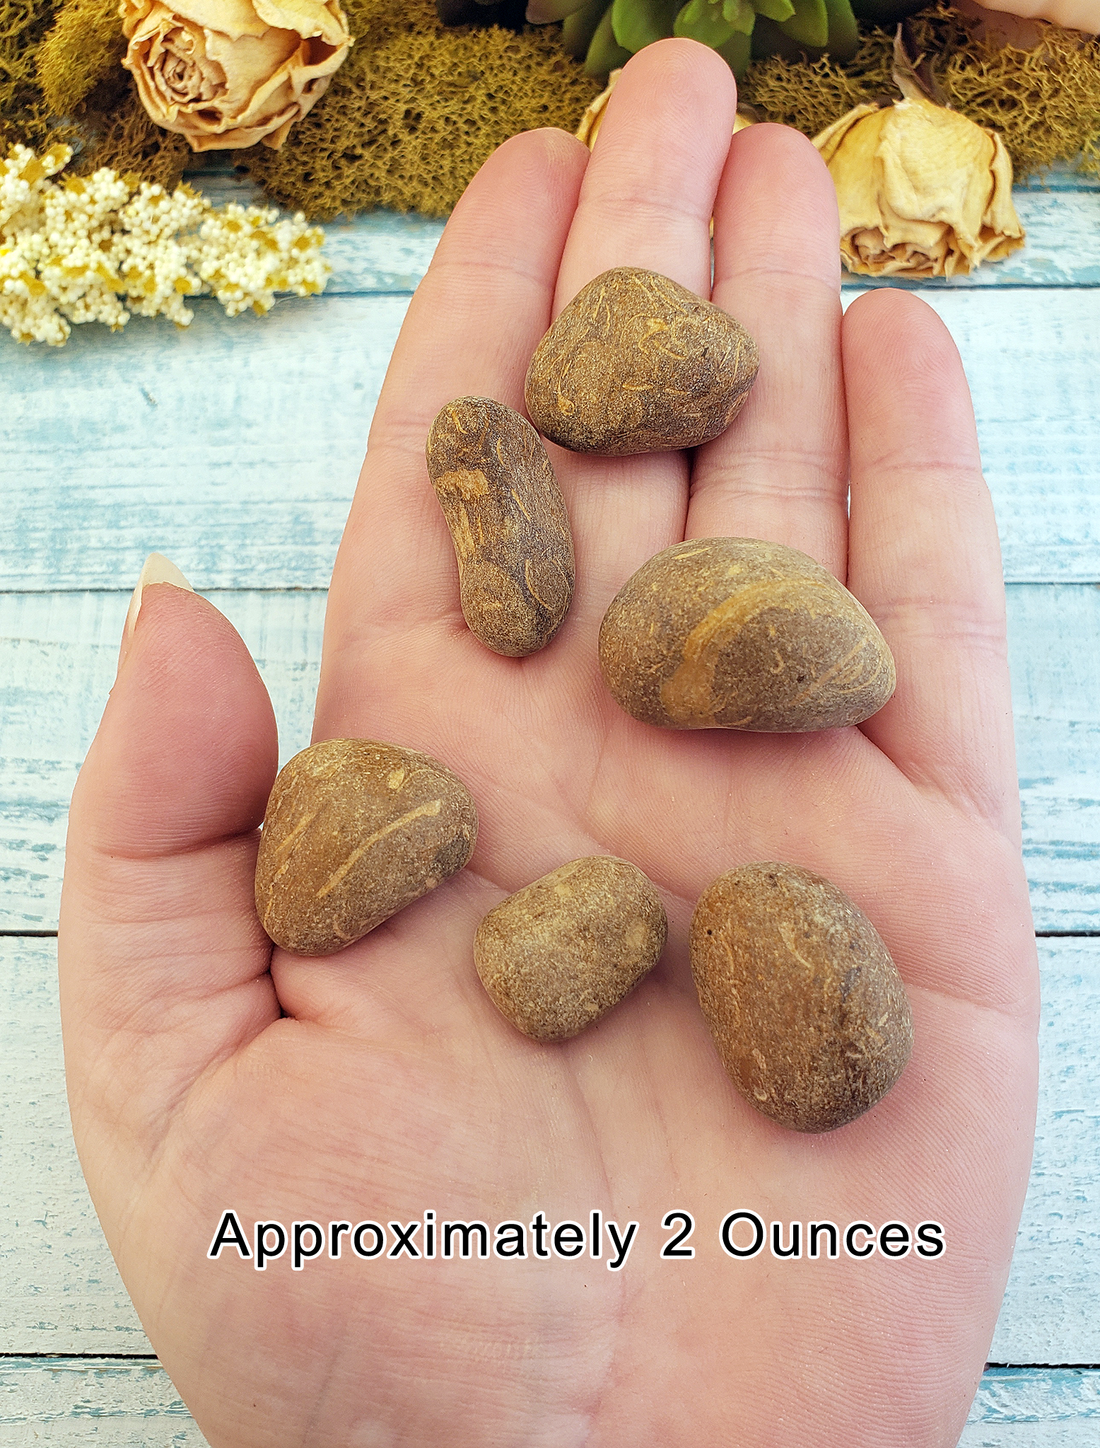 Calligraphy Stone Tumbled Gemstone - 2 Ounces in Hand